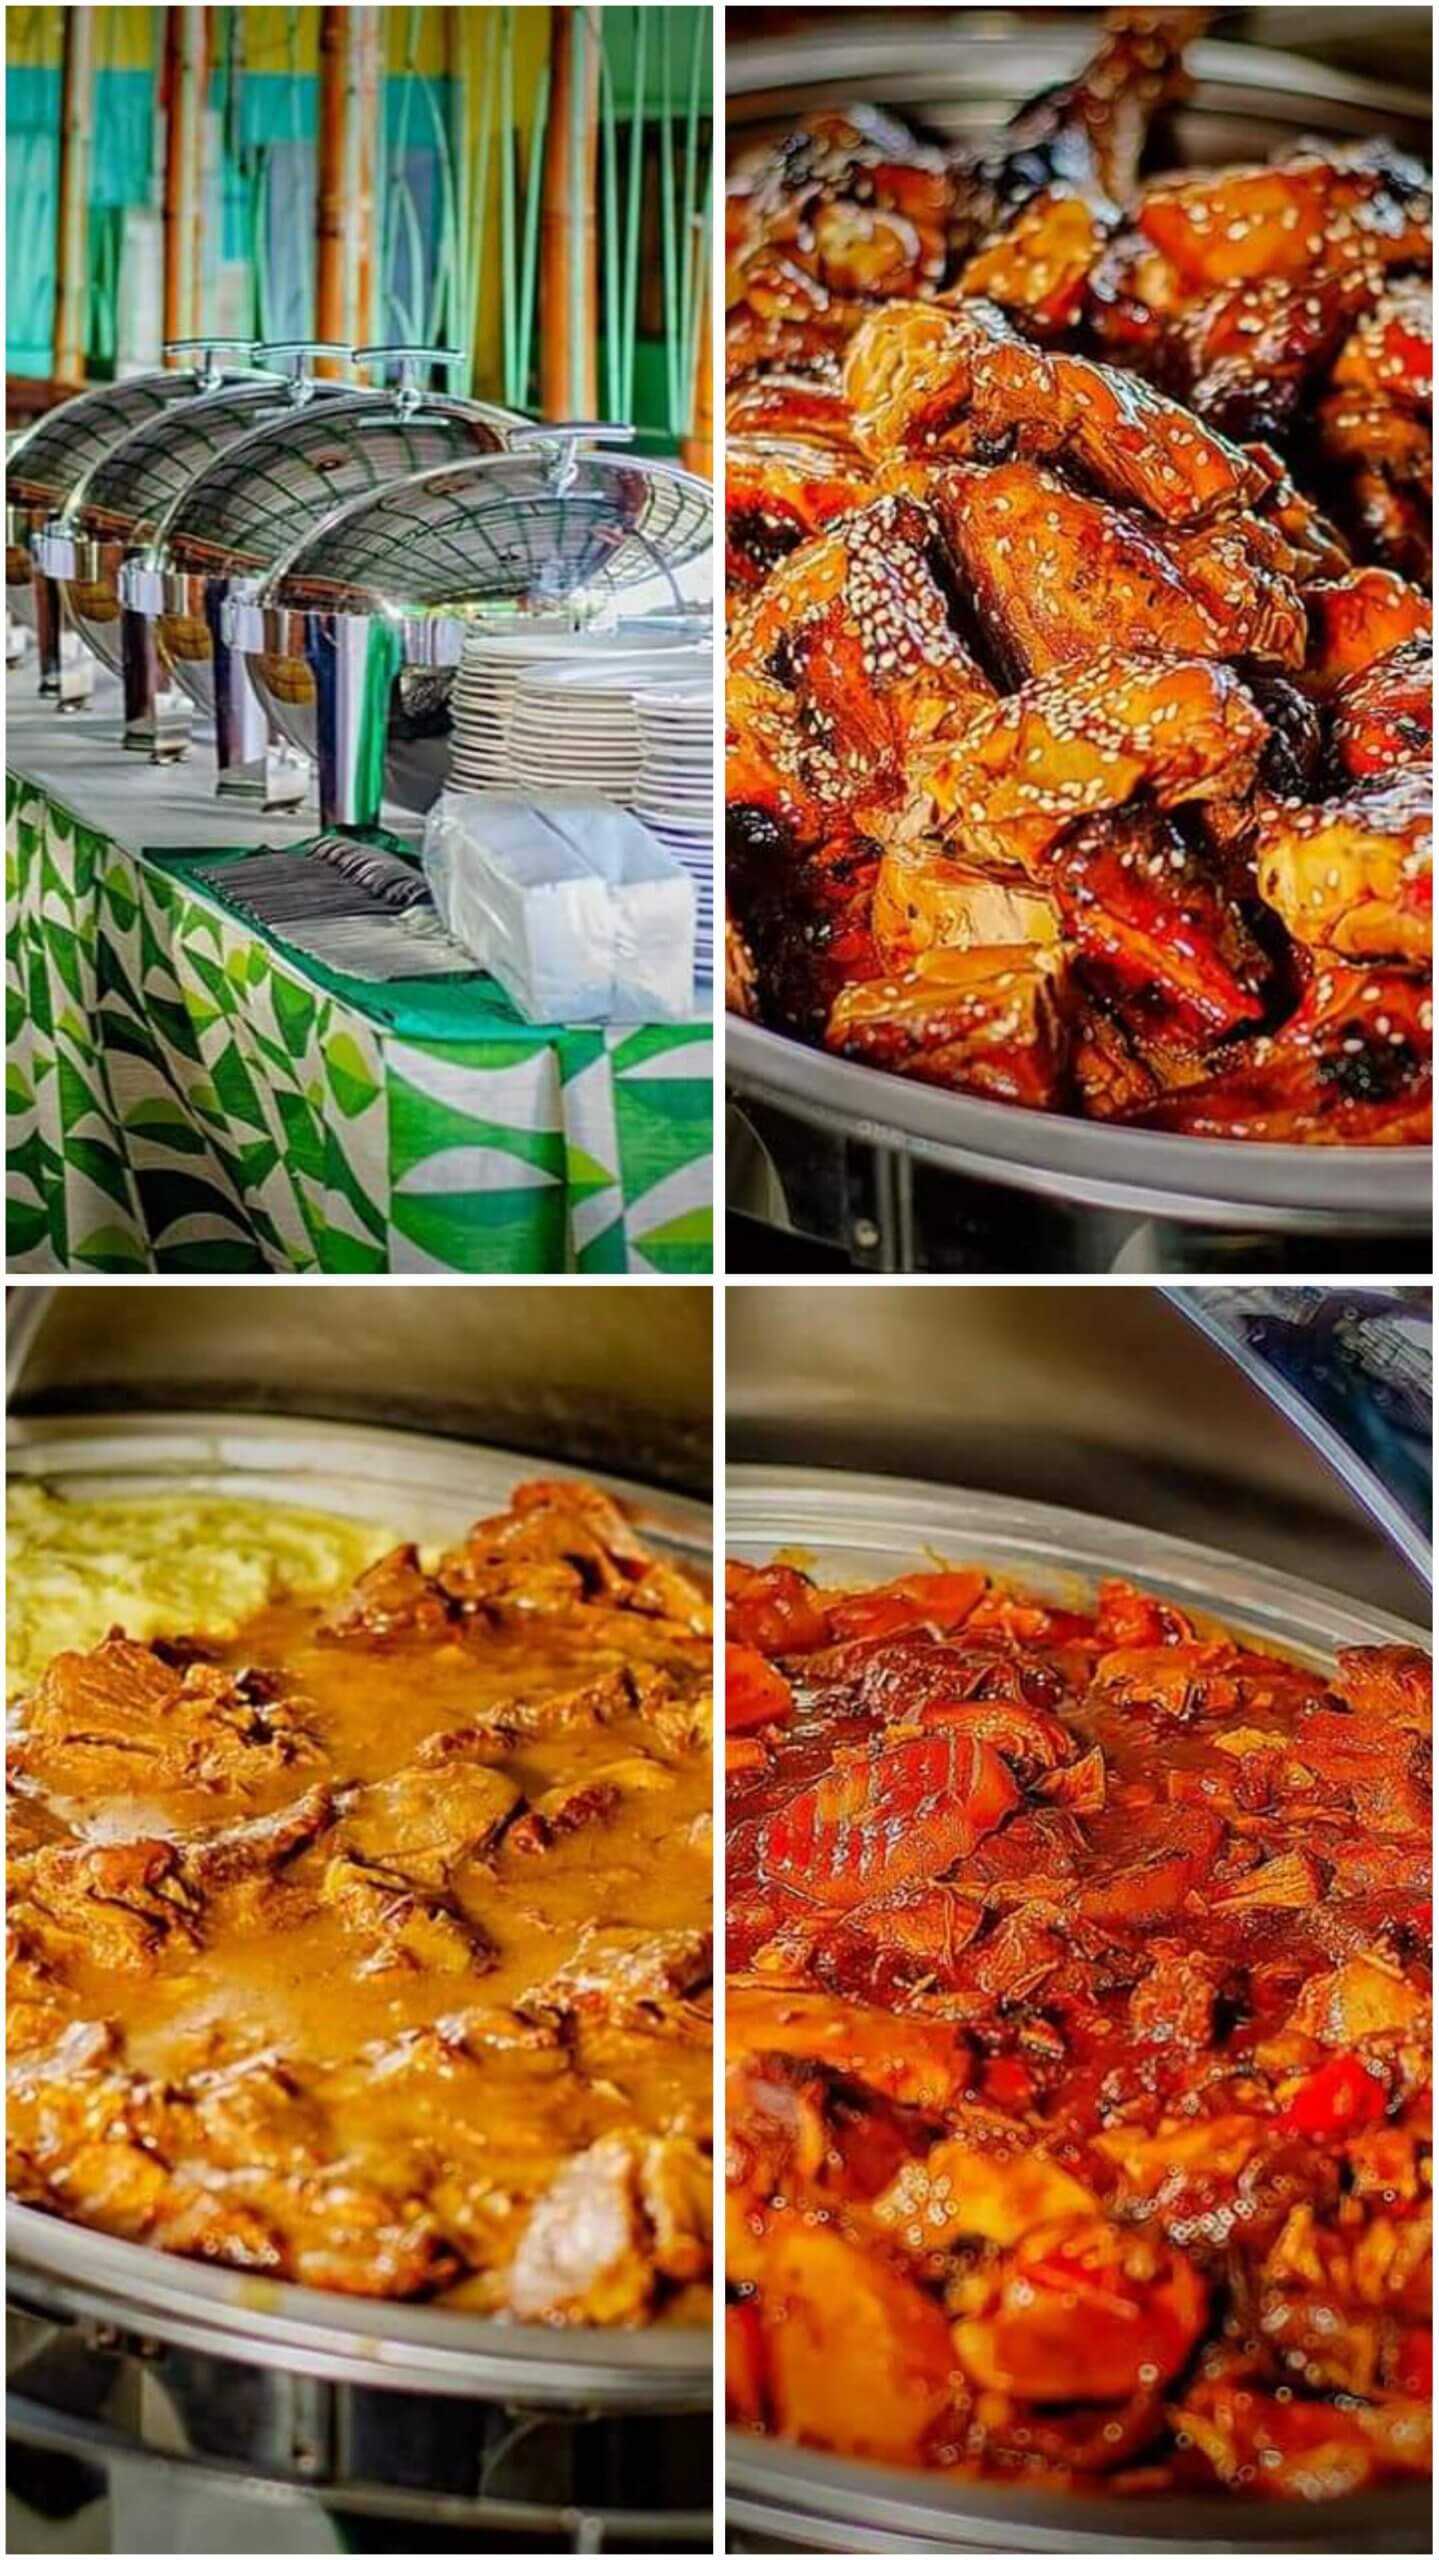 catering services in bataan